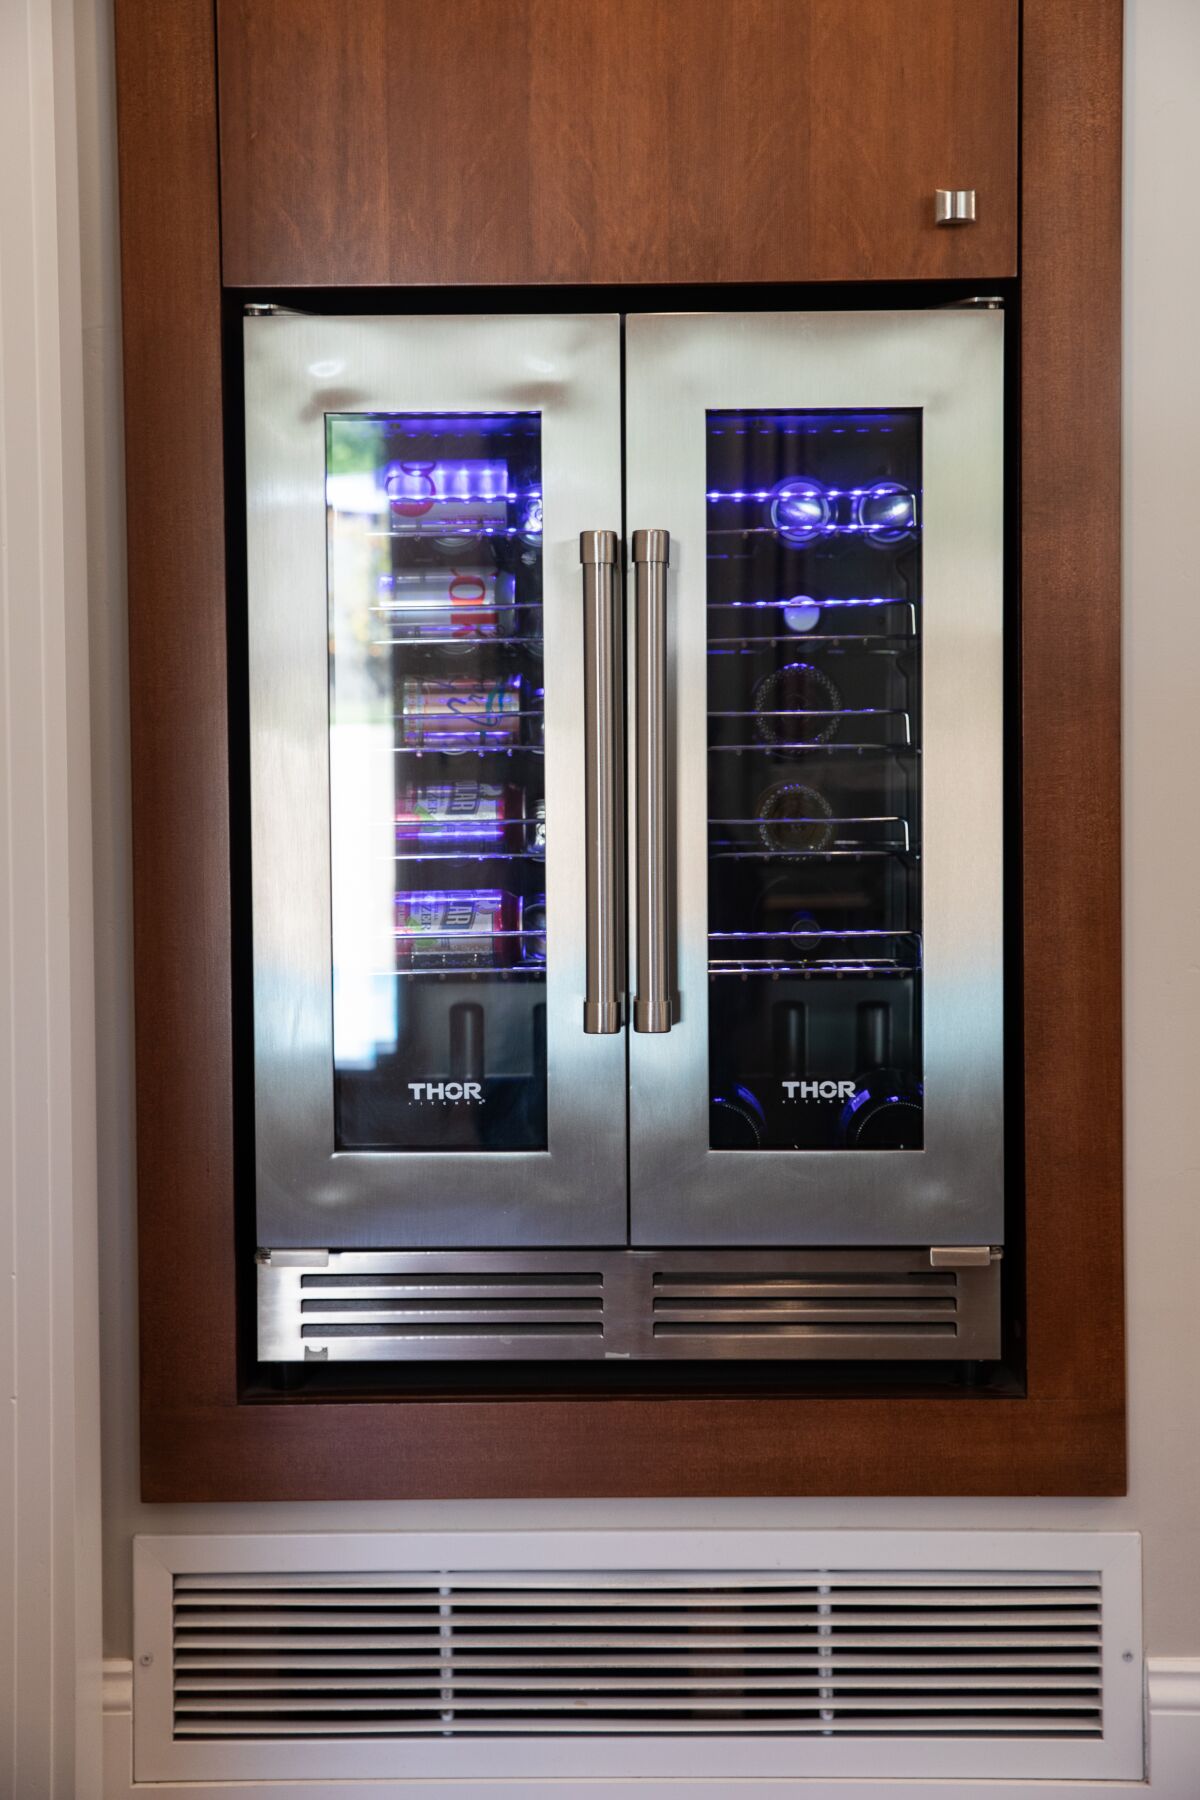 A wine refrigerator in the remodeled kitchen of Rebecca Zoni-McMakin's home.